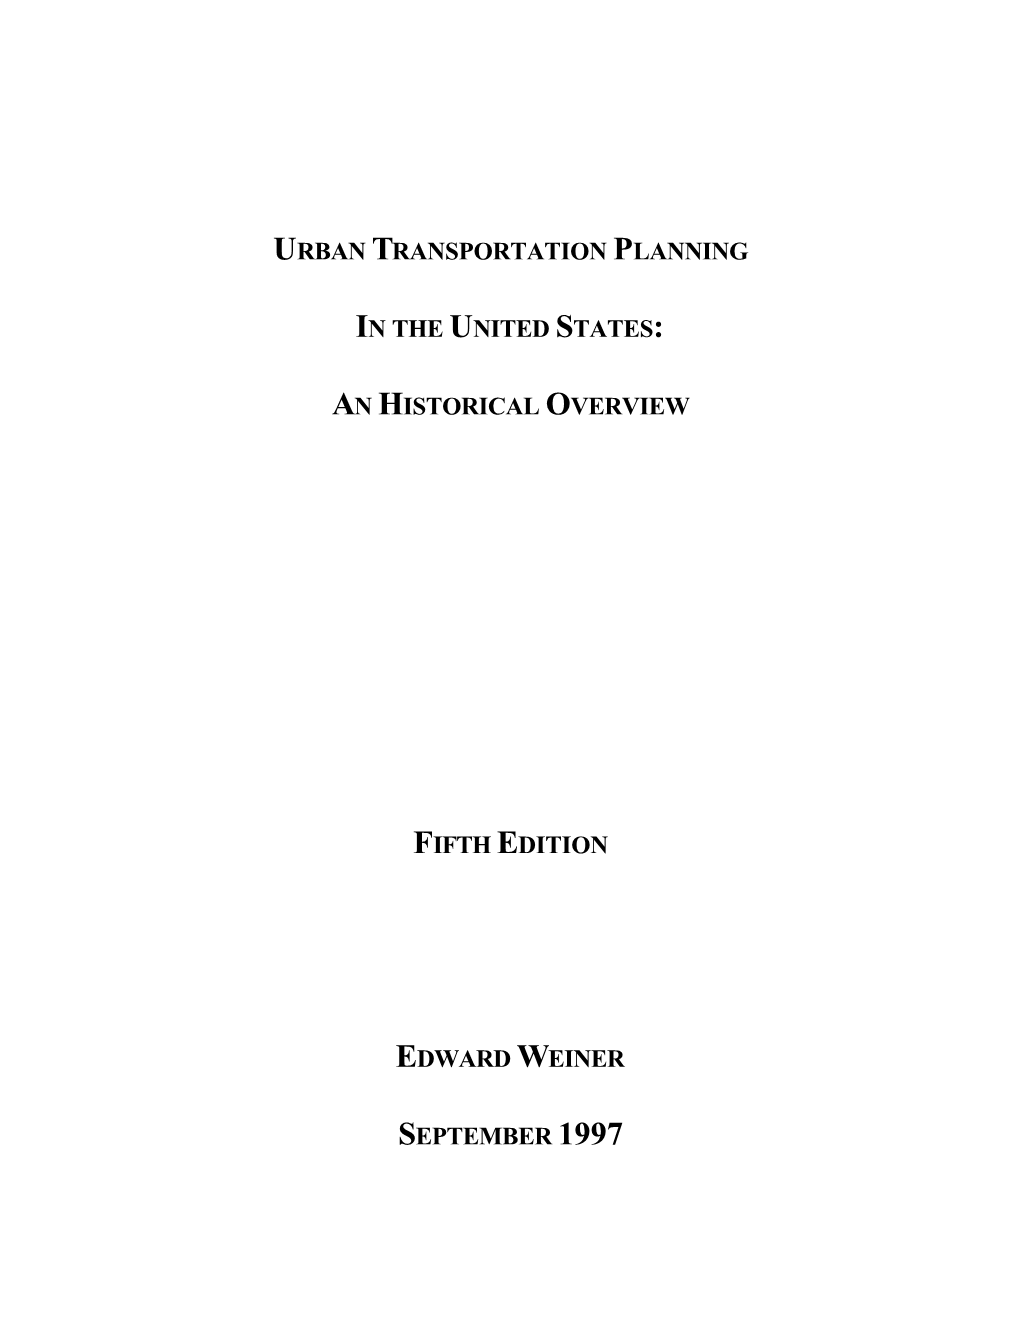 Urban Transportation Planning in the United States: an Historical Overview Fifth Edition Edward Weiner September 1997